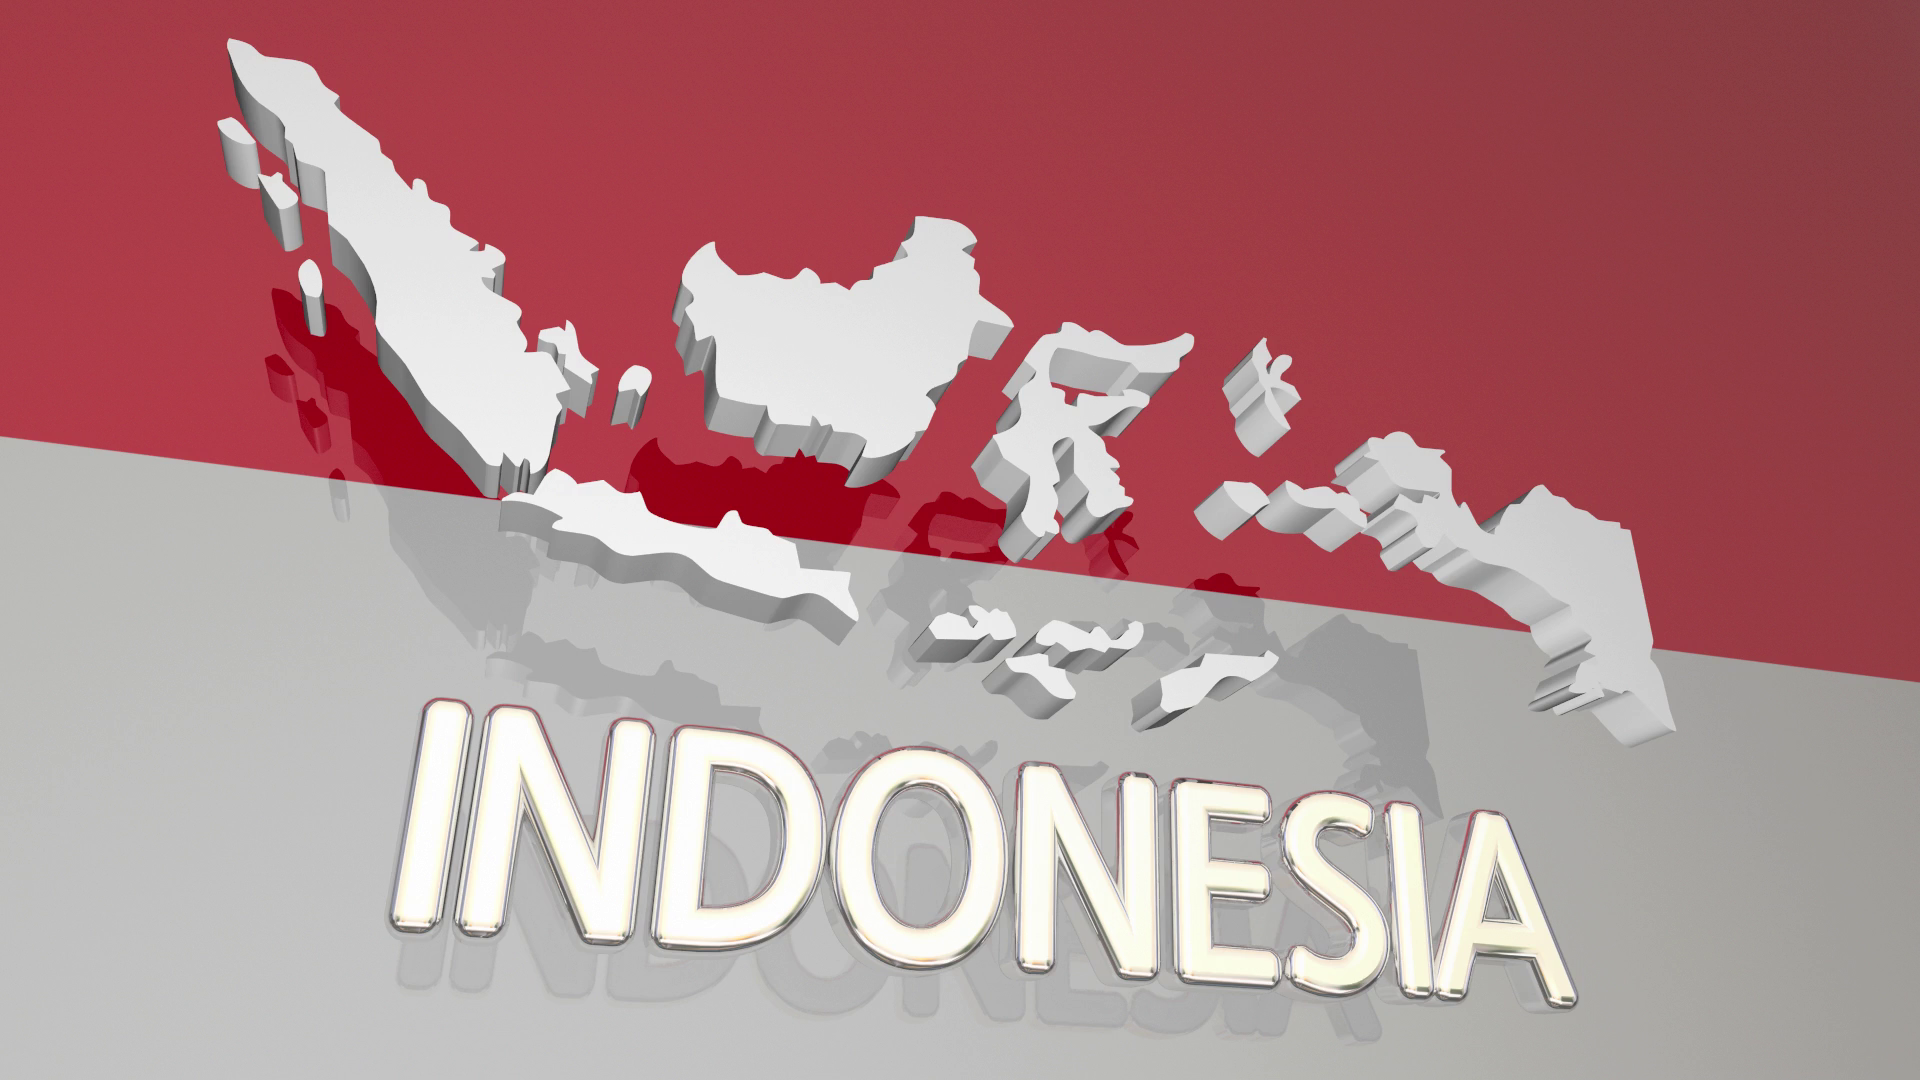 Indonesia Flag And Map - HD Wallpaper 